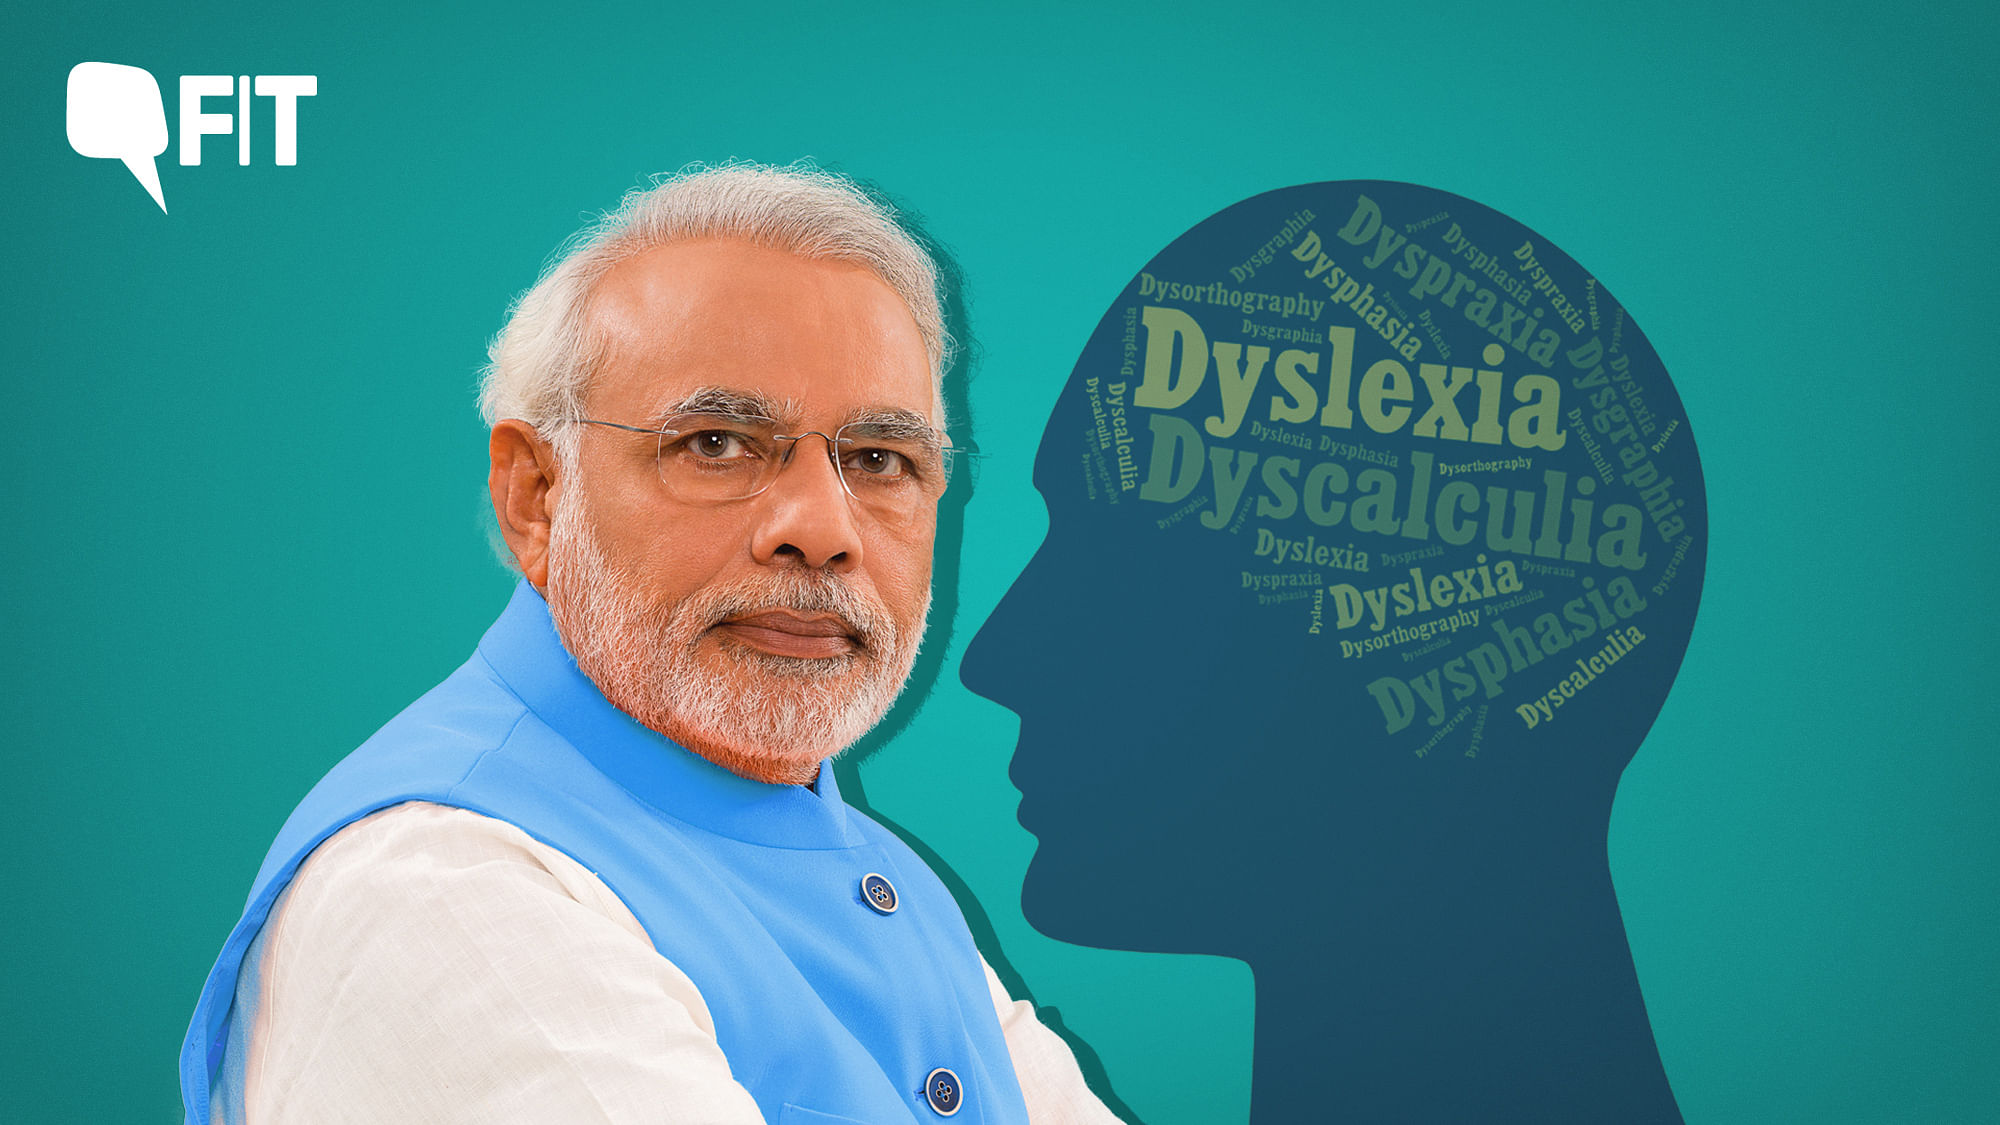 Contrary to popular belief, dyslexia has nothing to do with intelligence. 